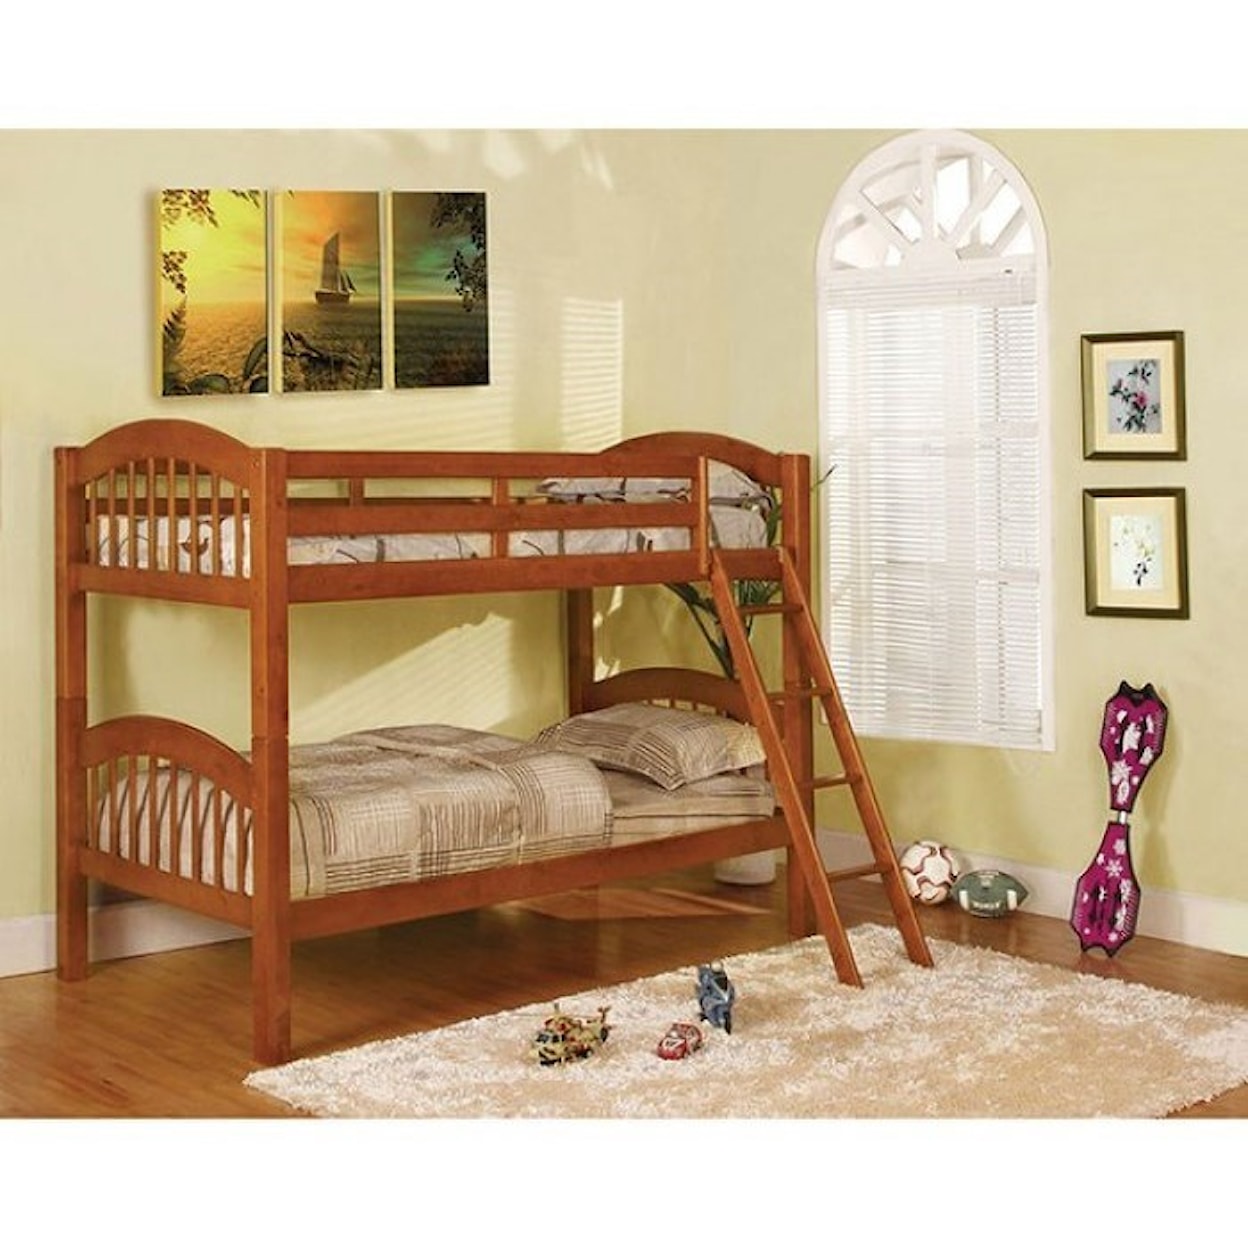 Furniture of America Coney Island Twin over Twin Bunk Bed